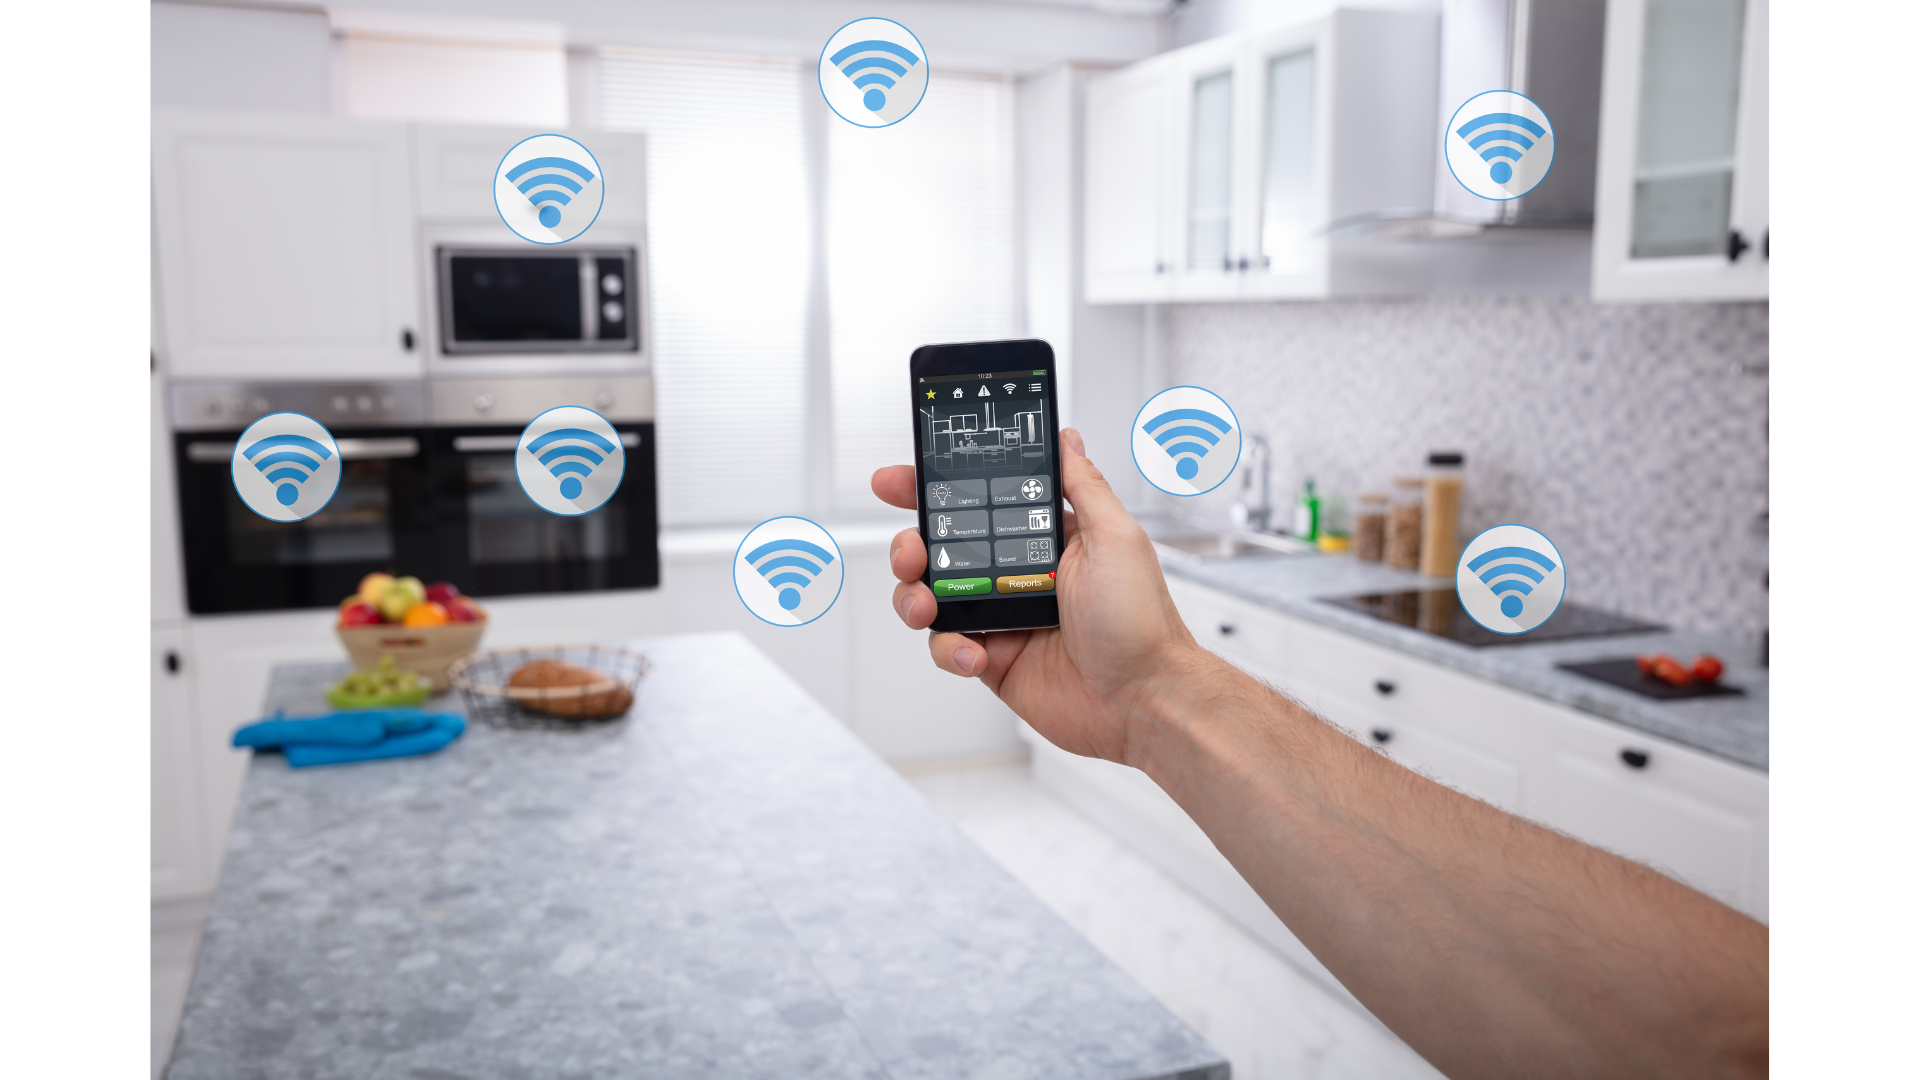 smart home appliances / kitchen appliances remotely controlled